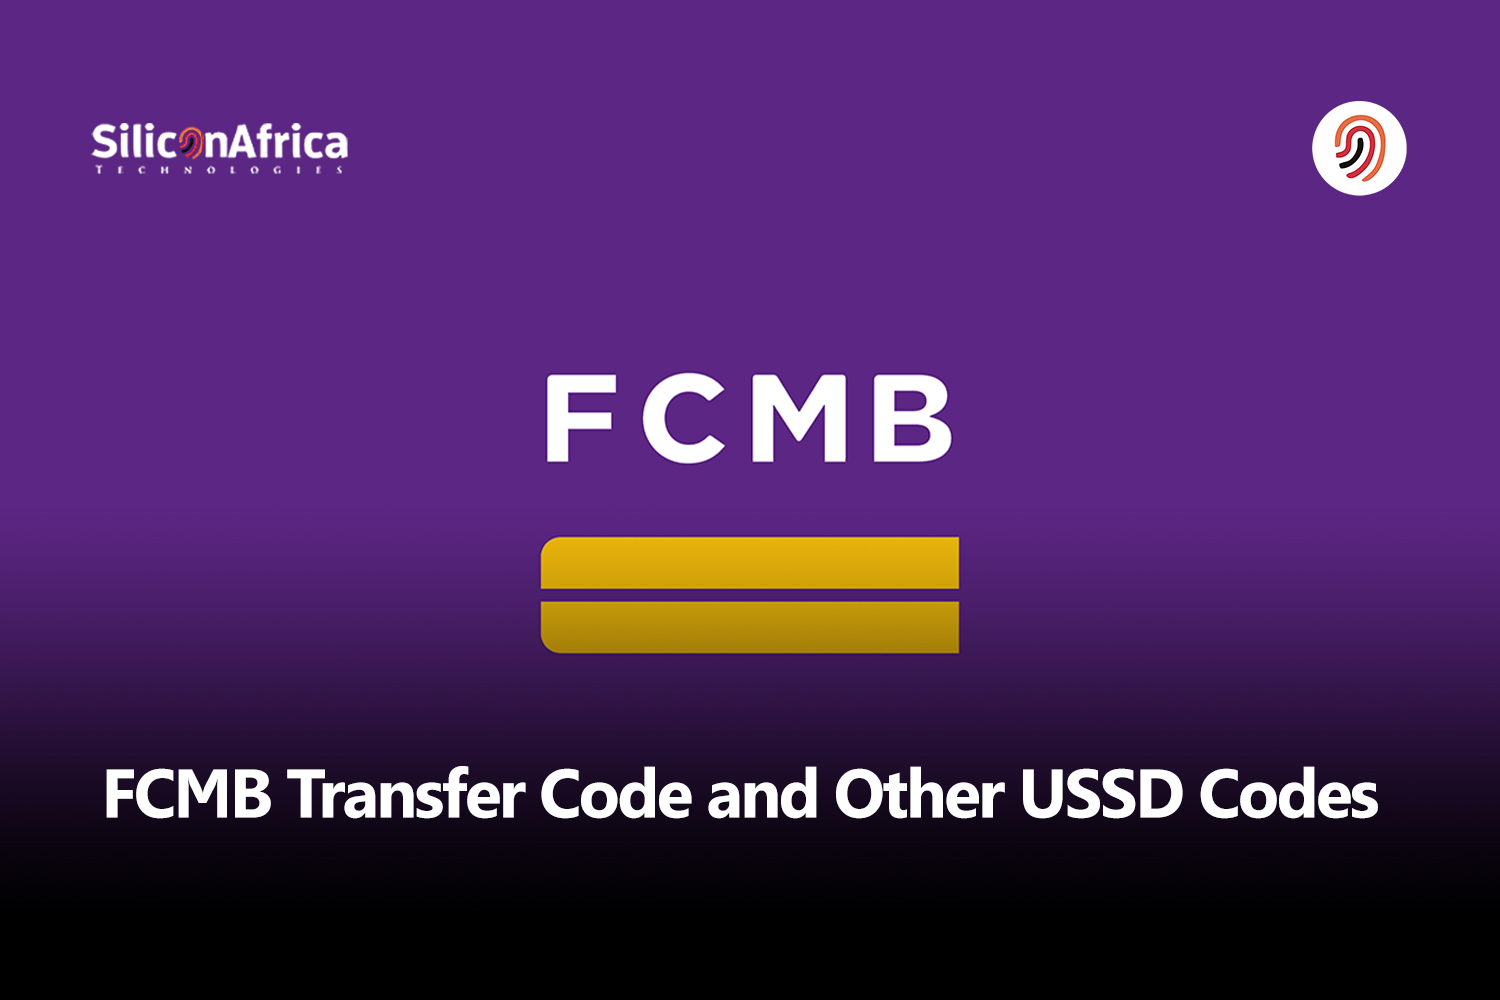 FCMB Transfer Code and Other USSD Codes